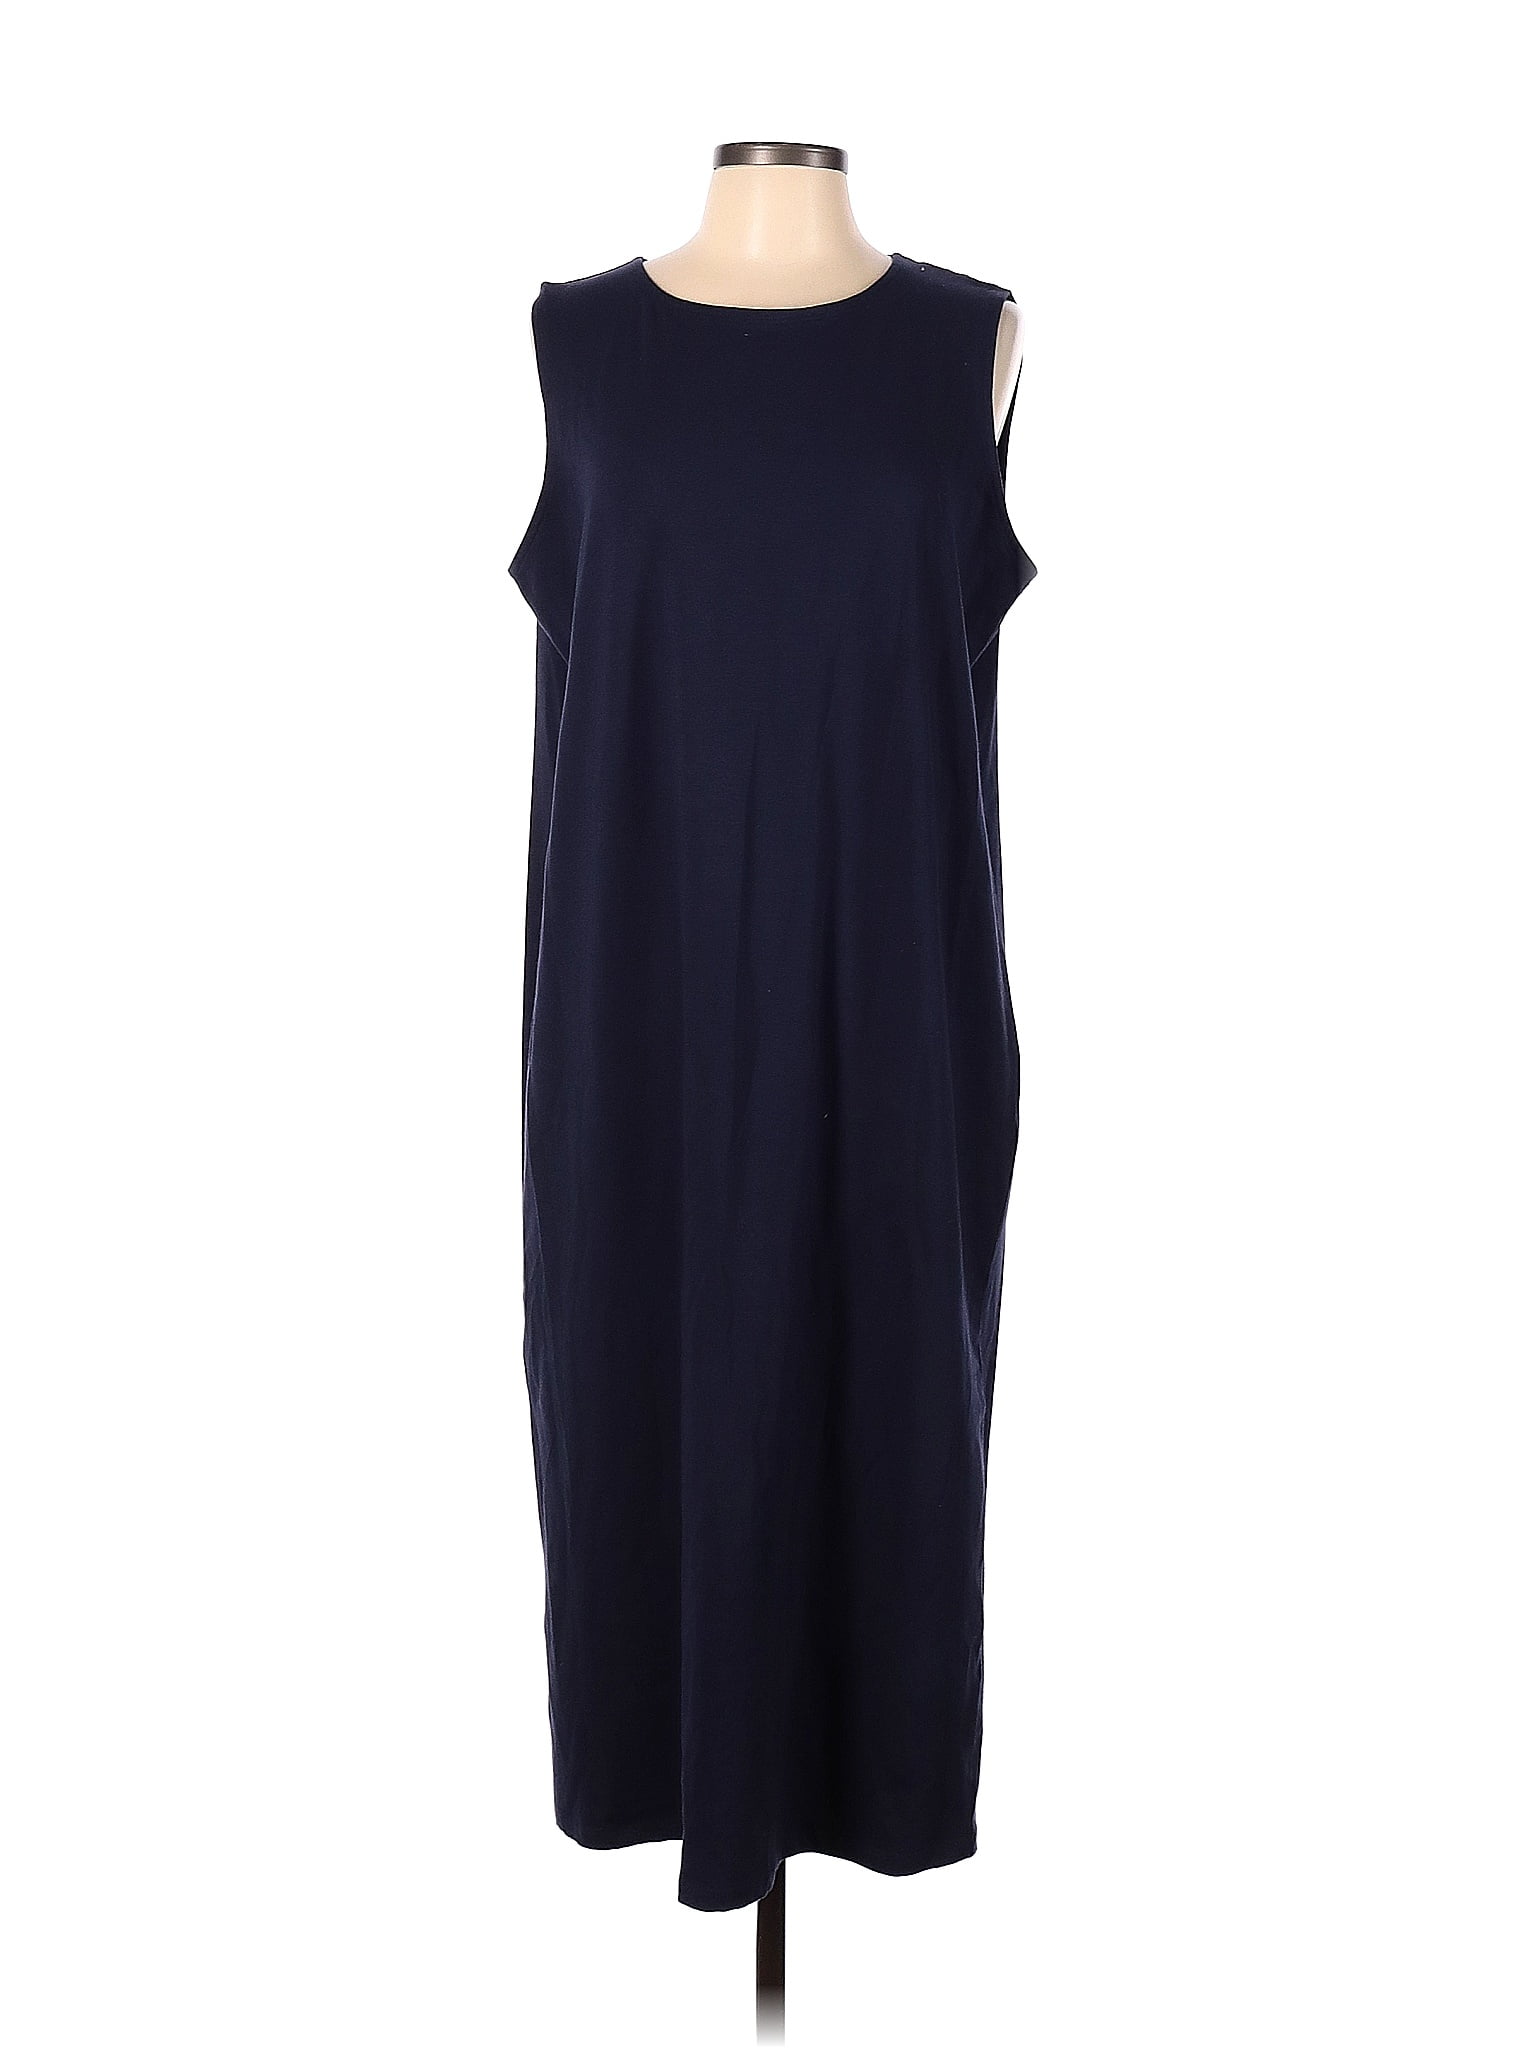 Eileen Fisher Premium Dresses On Sale Up To 90% Off Retail | thredUP